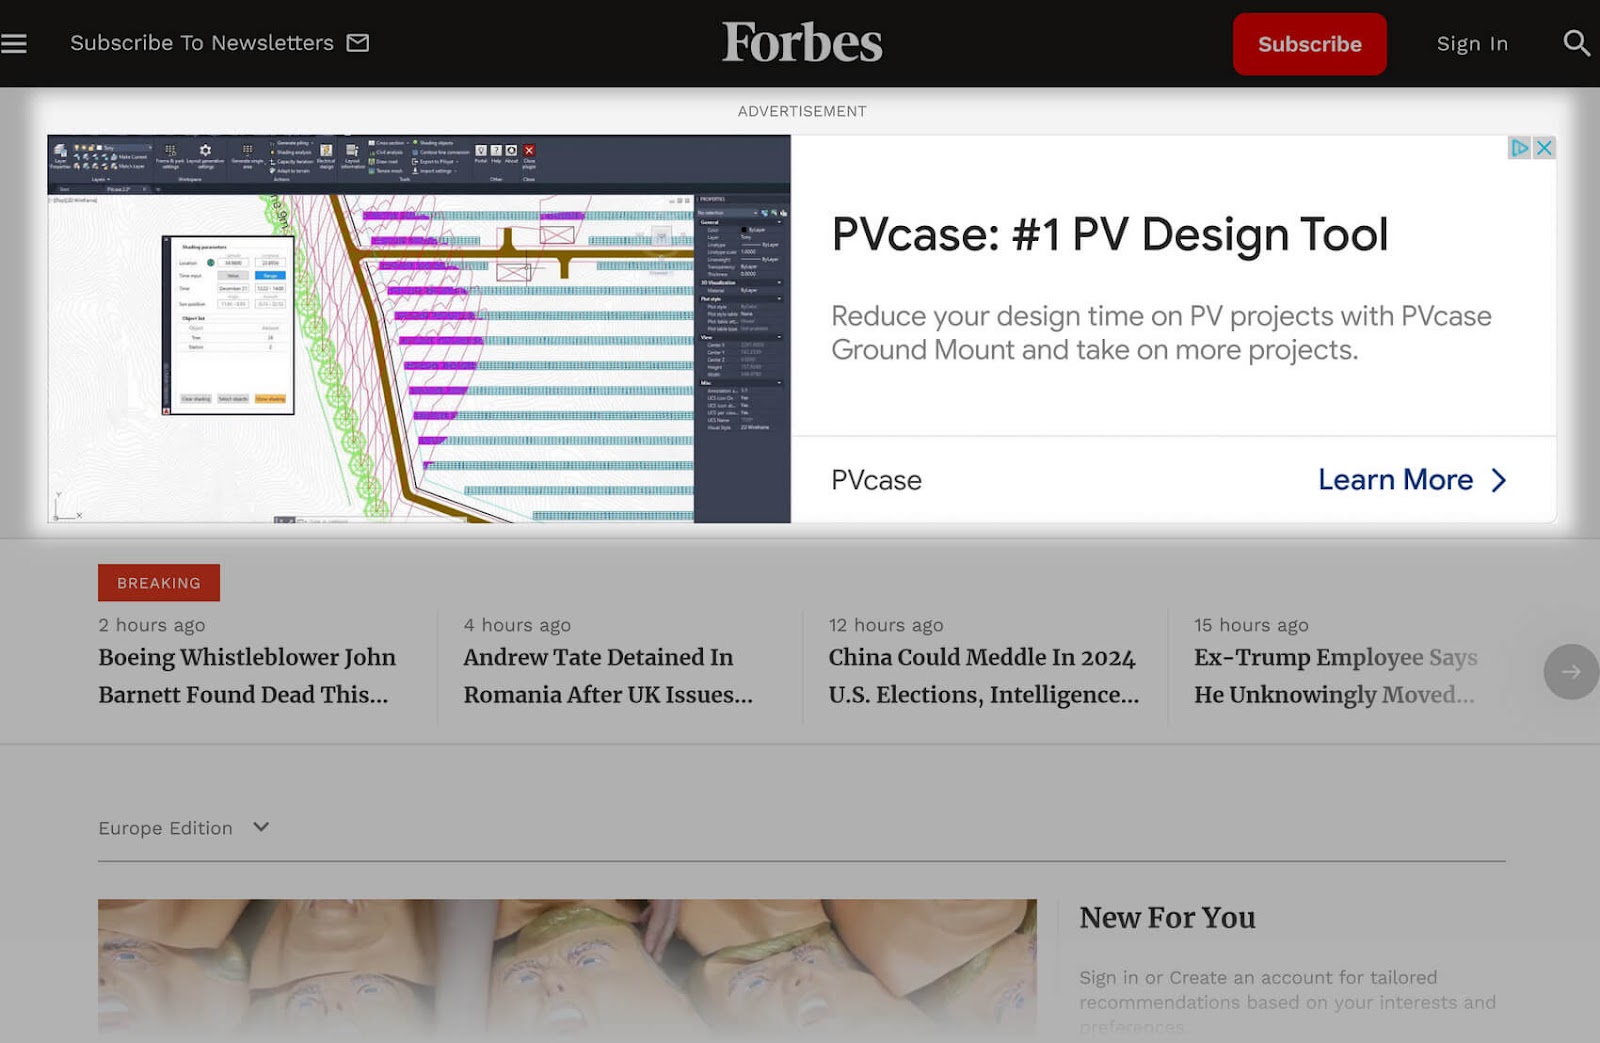 A display ad on Forbes’ homepage